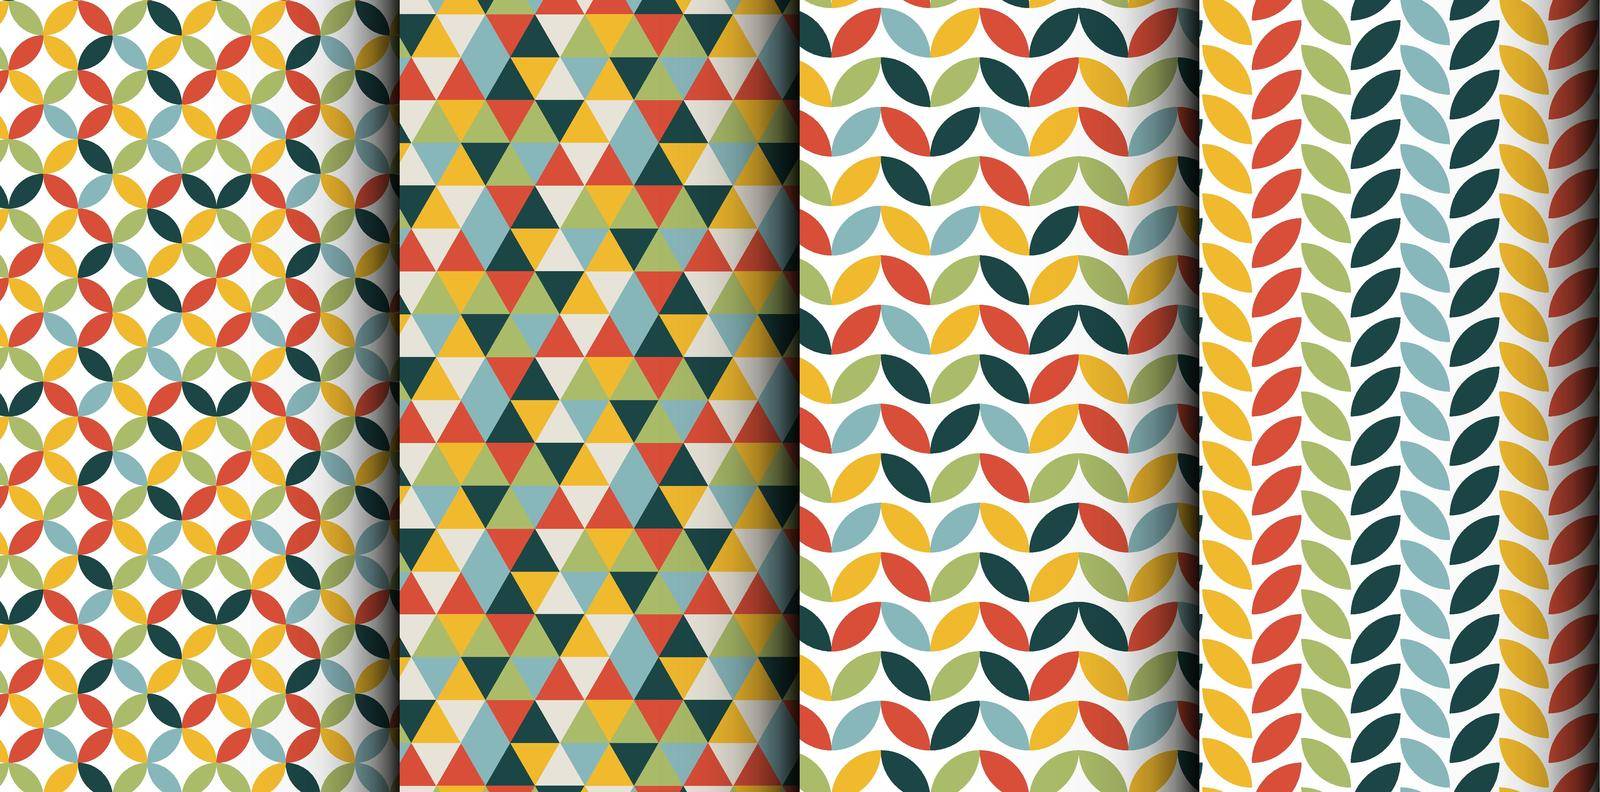 Four various retro pattern with abstract geometry shapes by orson